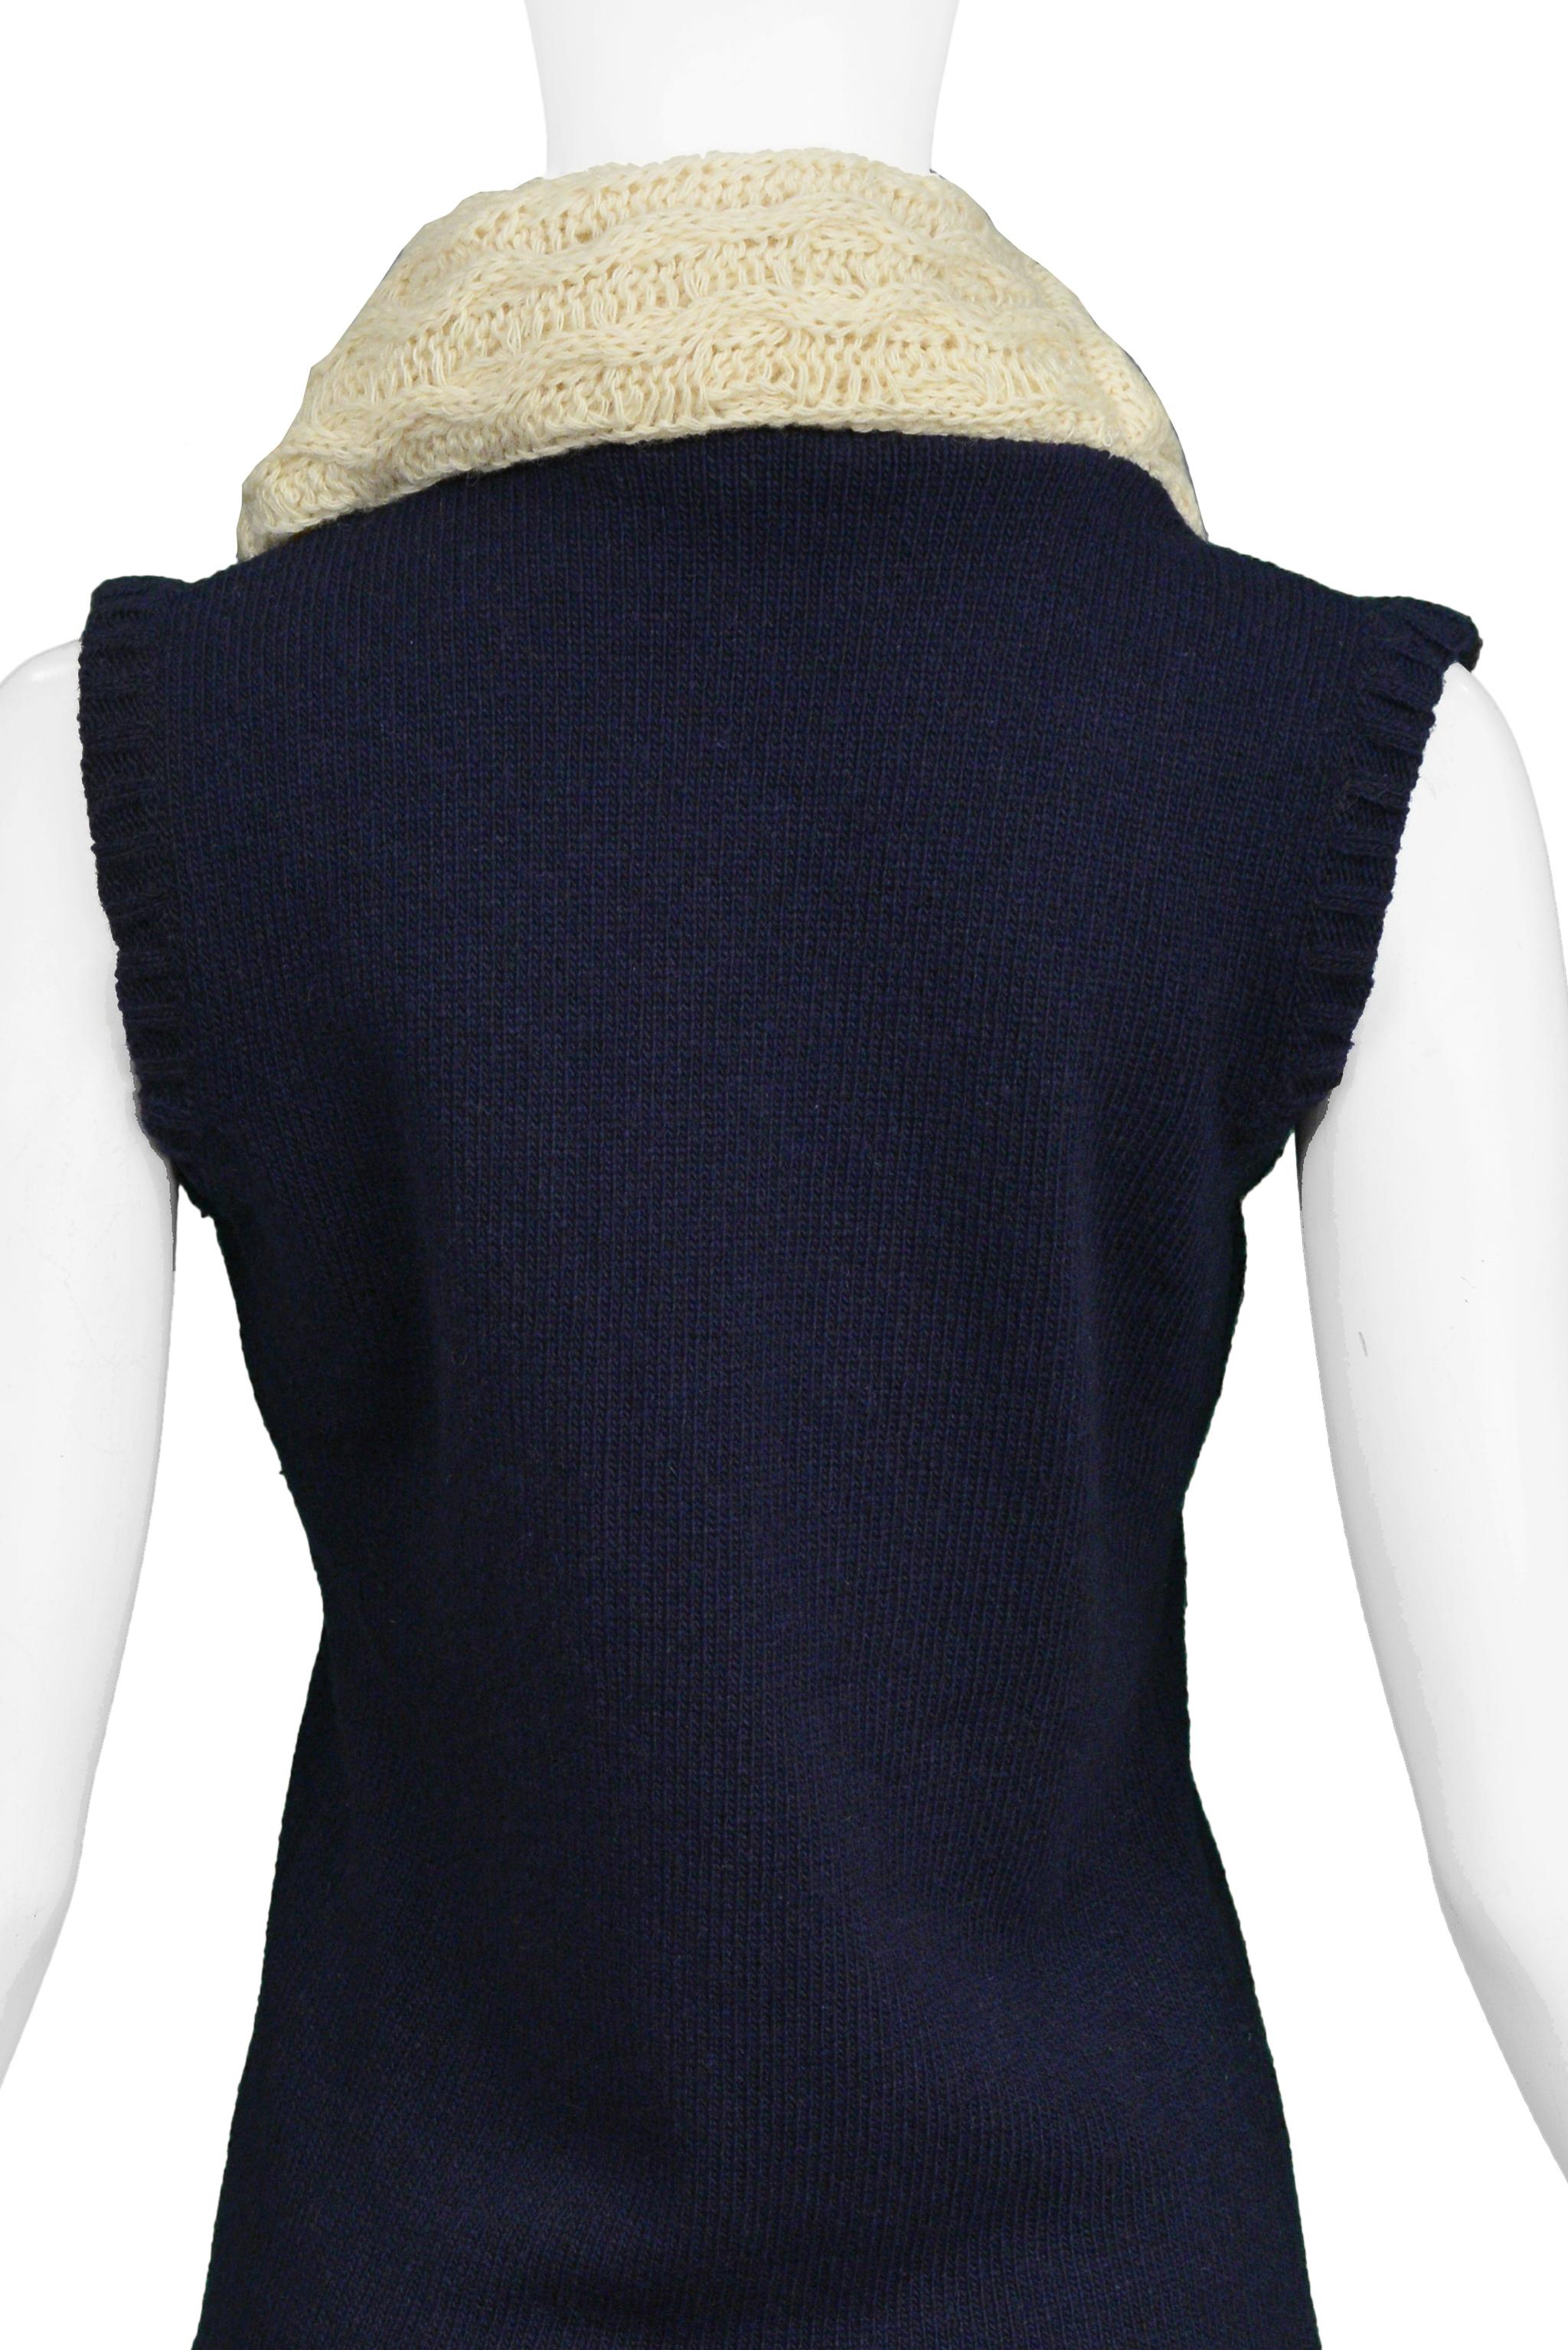 Balenciaga Navy Blue Sweater Vest  With Giant Cowl 2007 In Excellent Condition For Sale In Los Angeles, CA